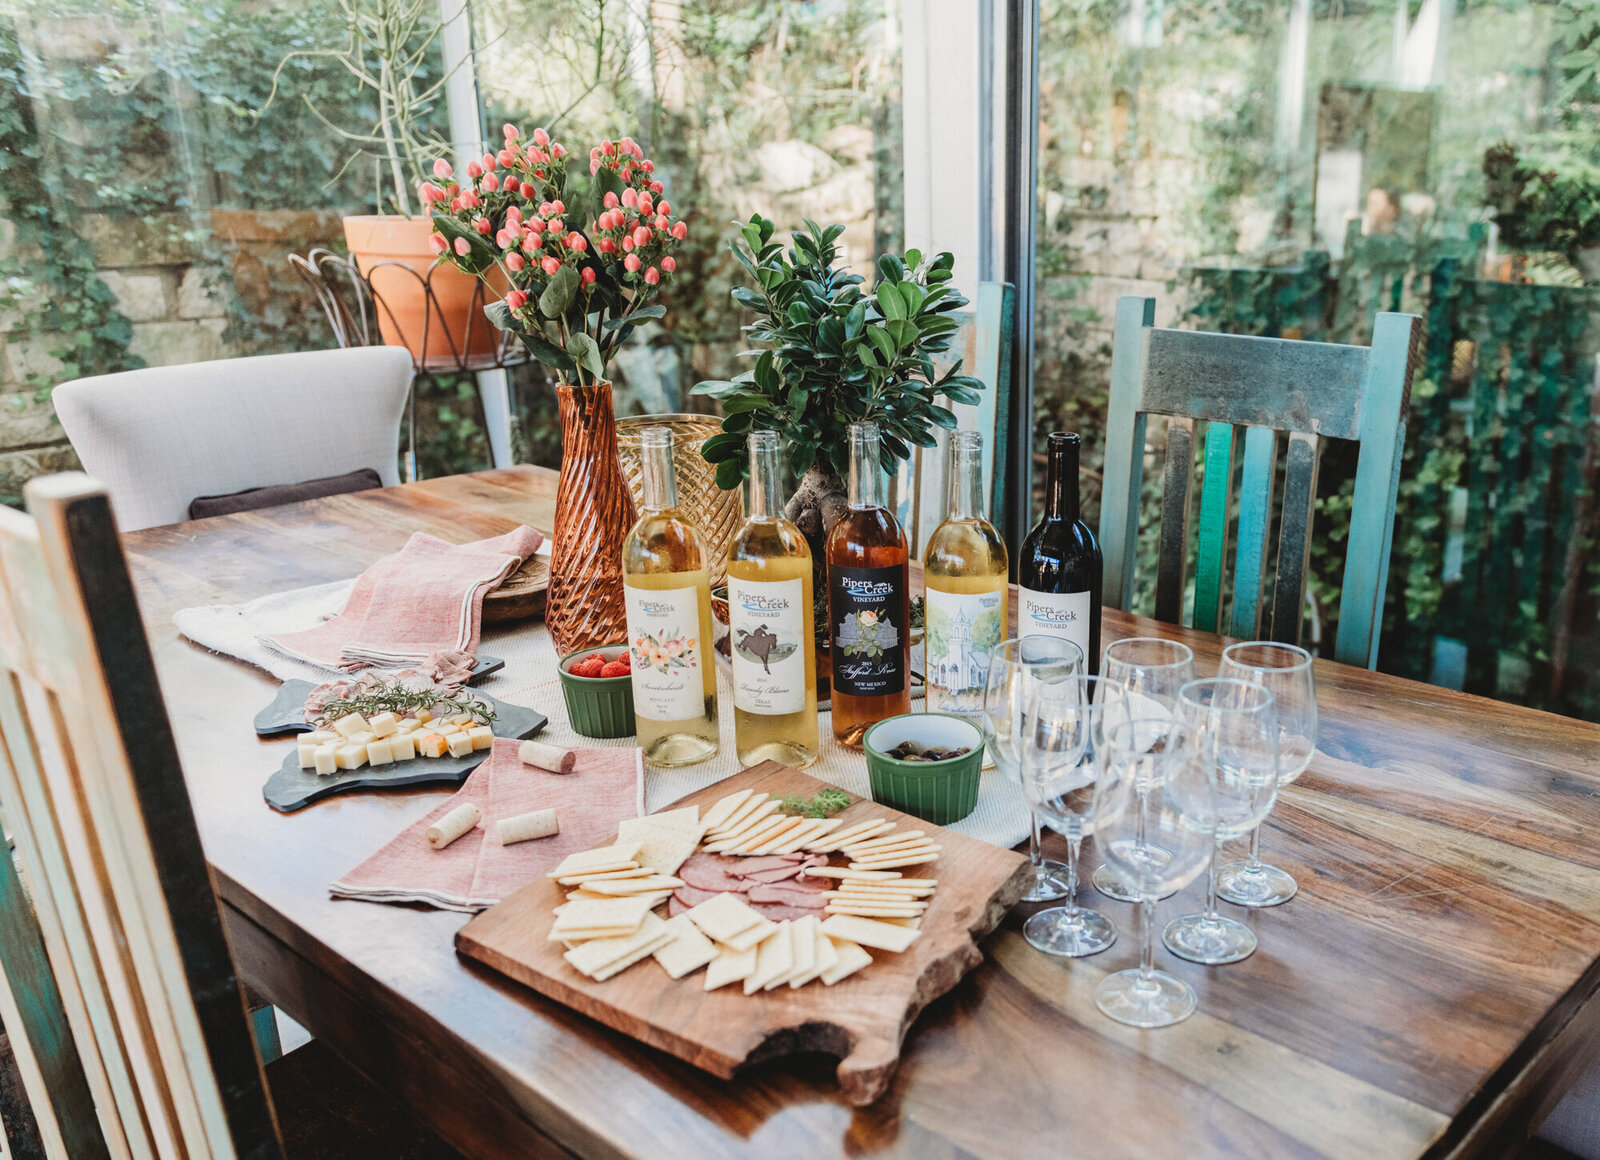 Branding Photographer, a table is set with a charcuterie in the center, lush garden outside the windows